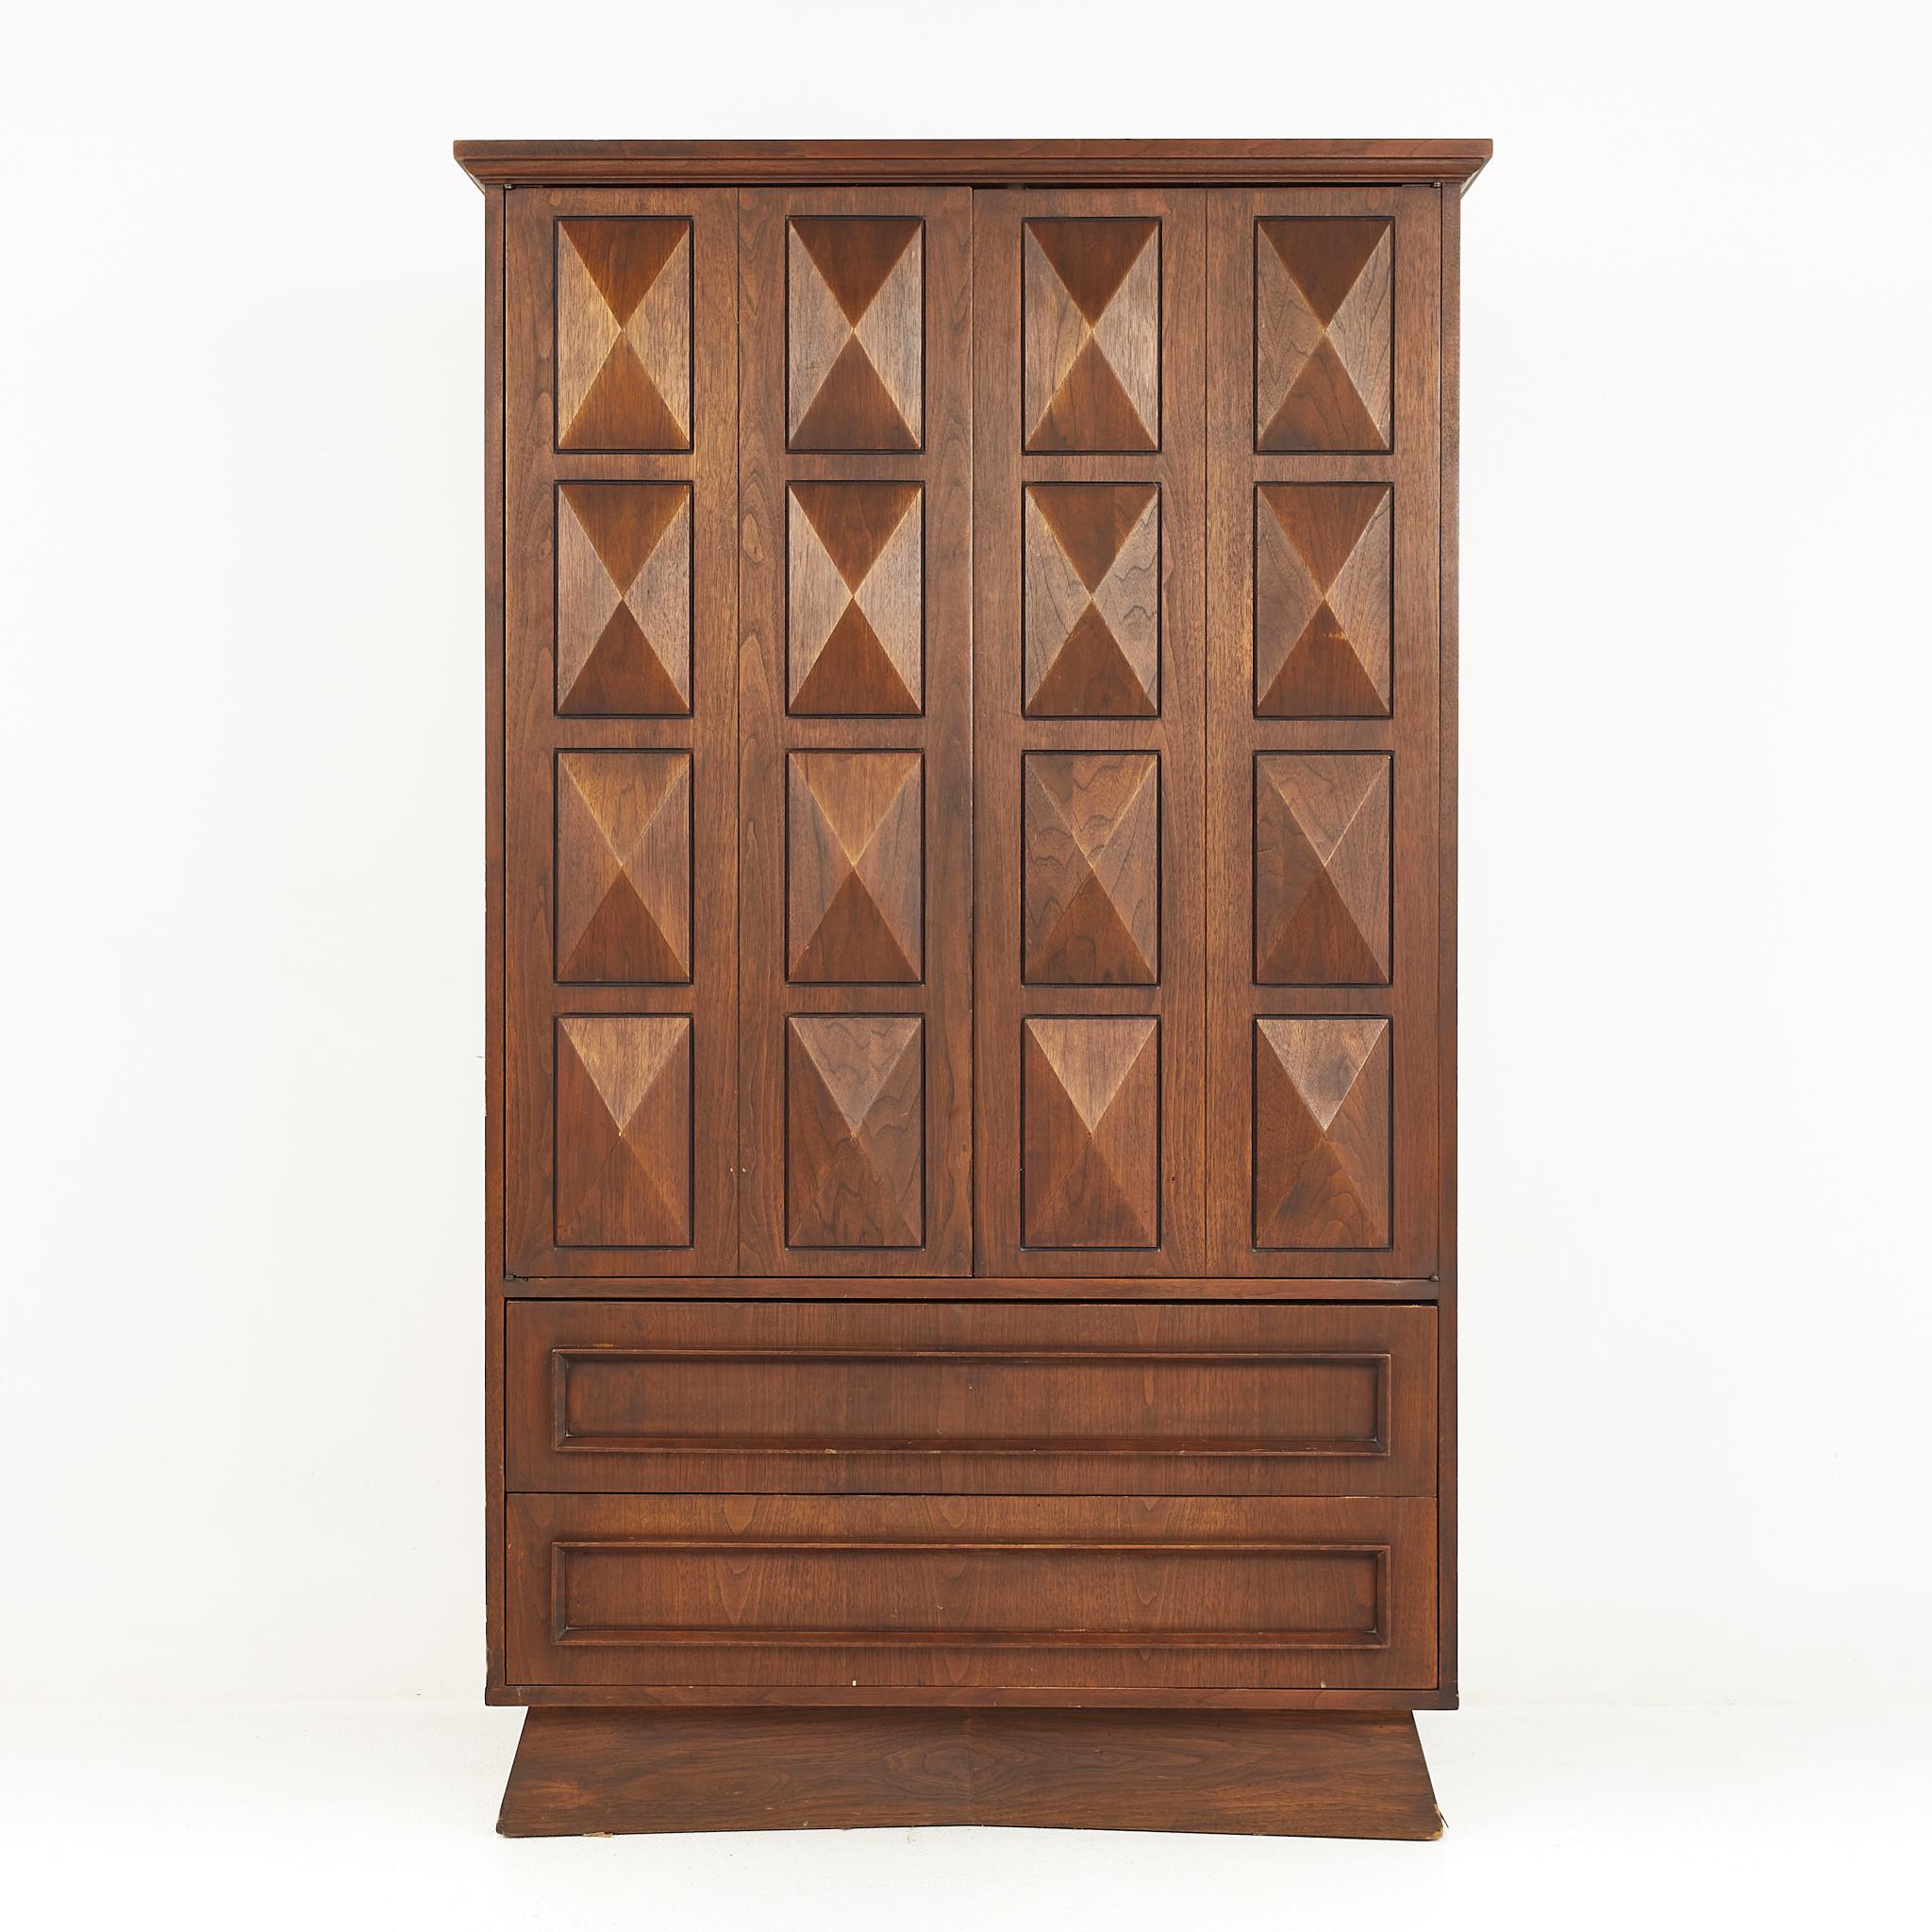 United style Brutalist mid century walnut highboy armoire dresser

The dresser measures: 39.5 wide x 20 deep x 65 inches high

All pieces of furniture can be had in what we call restored vintage condition. That means the piece is restored upon